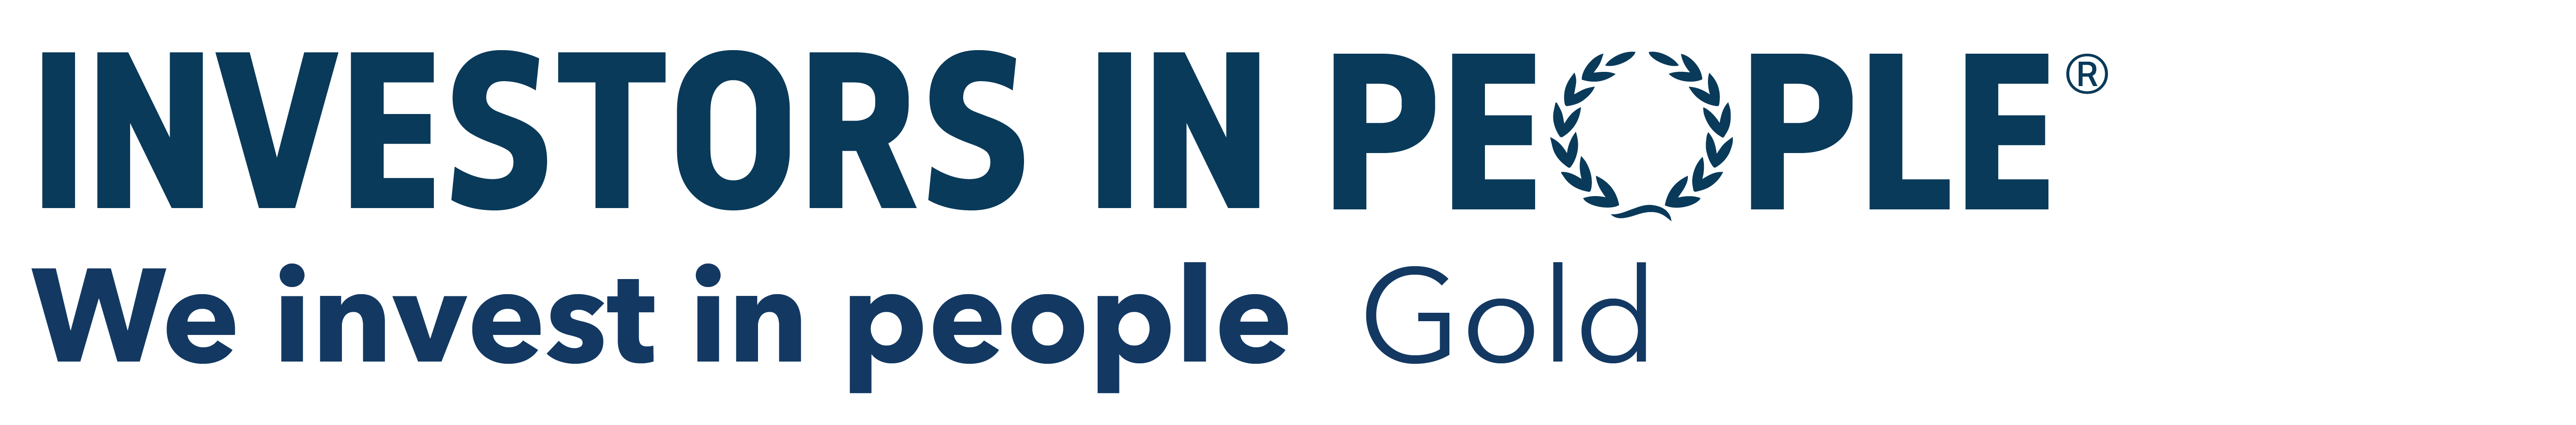 Invest in People Gold logo